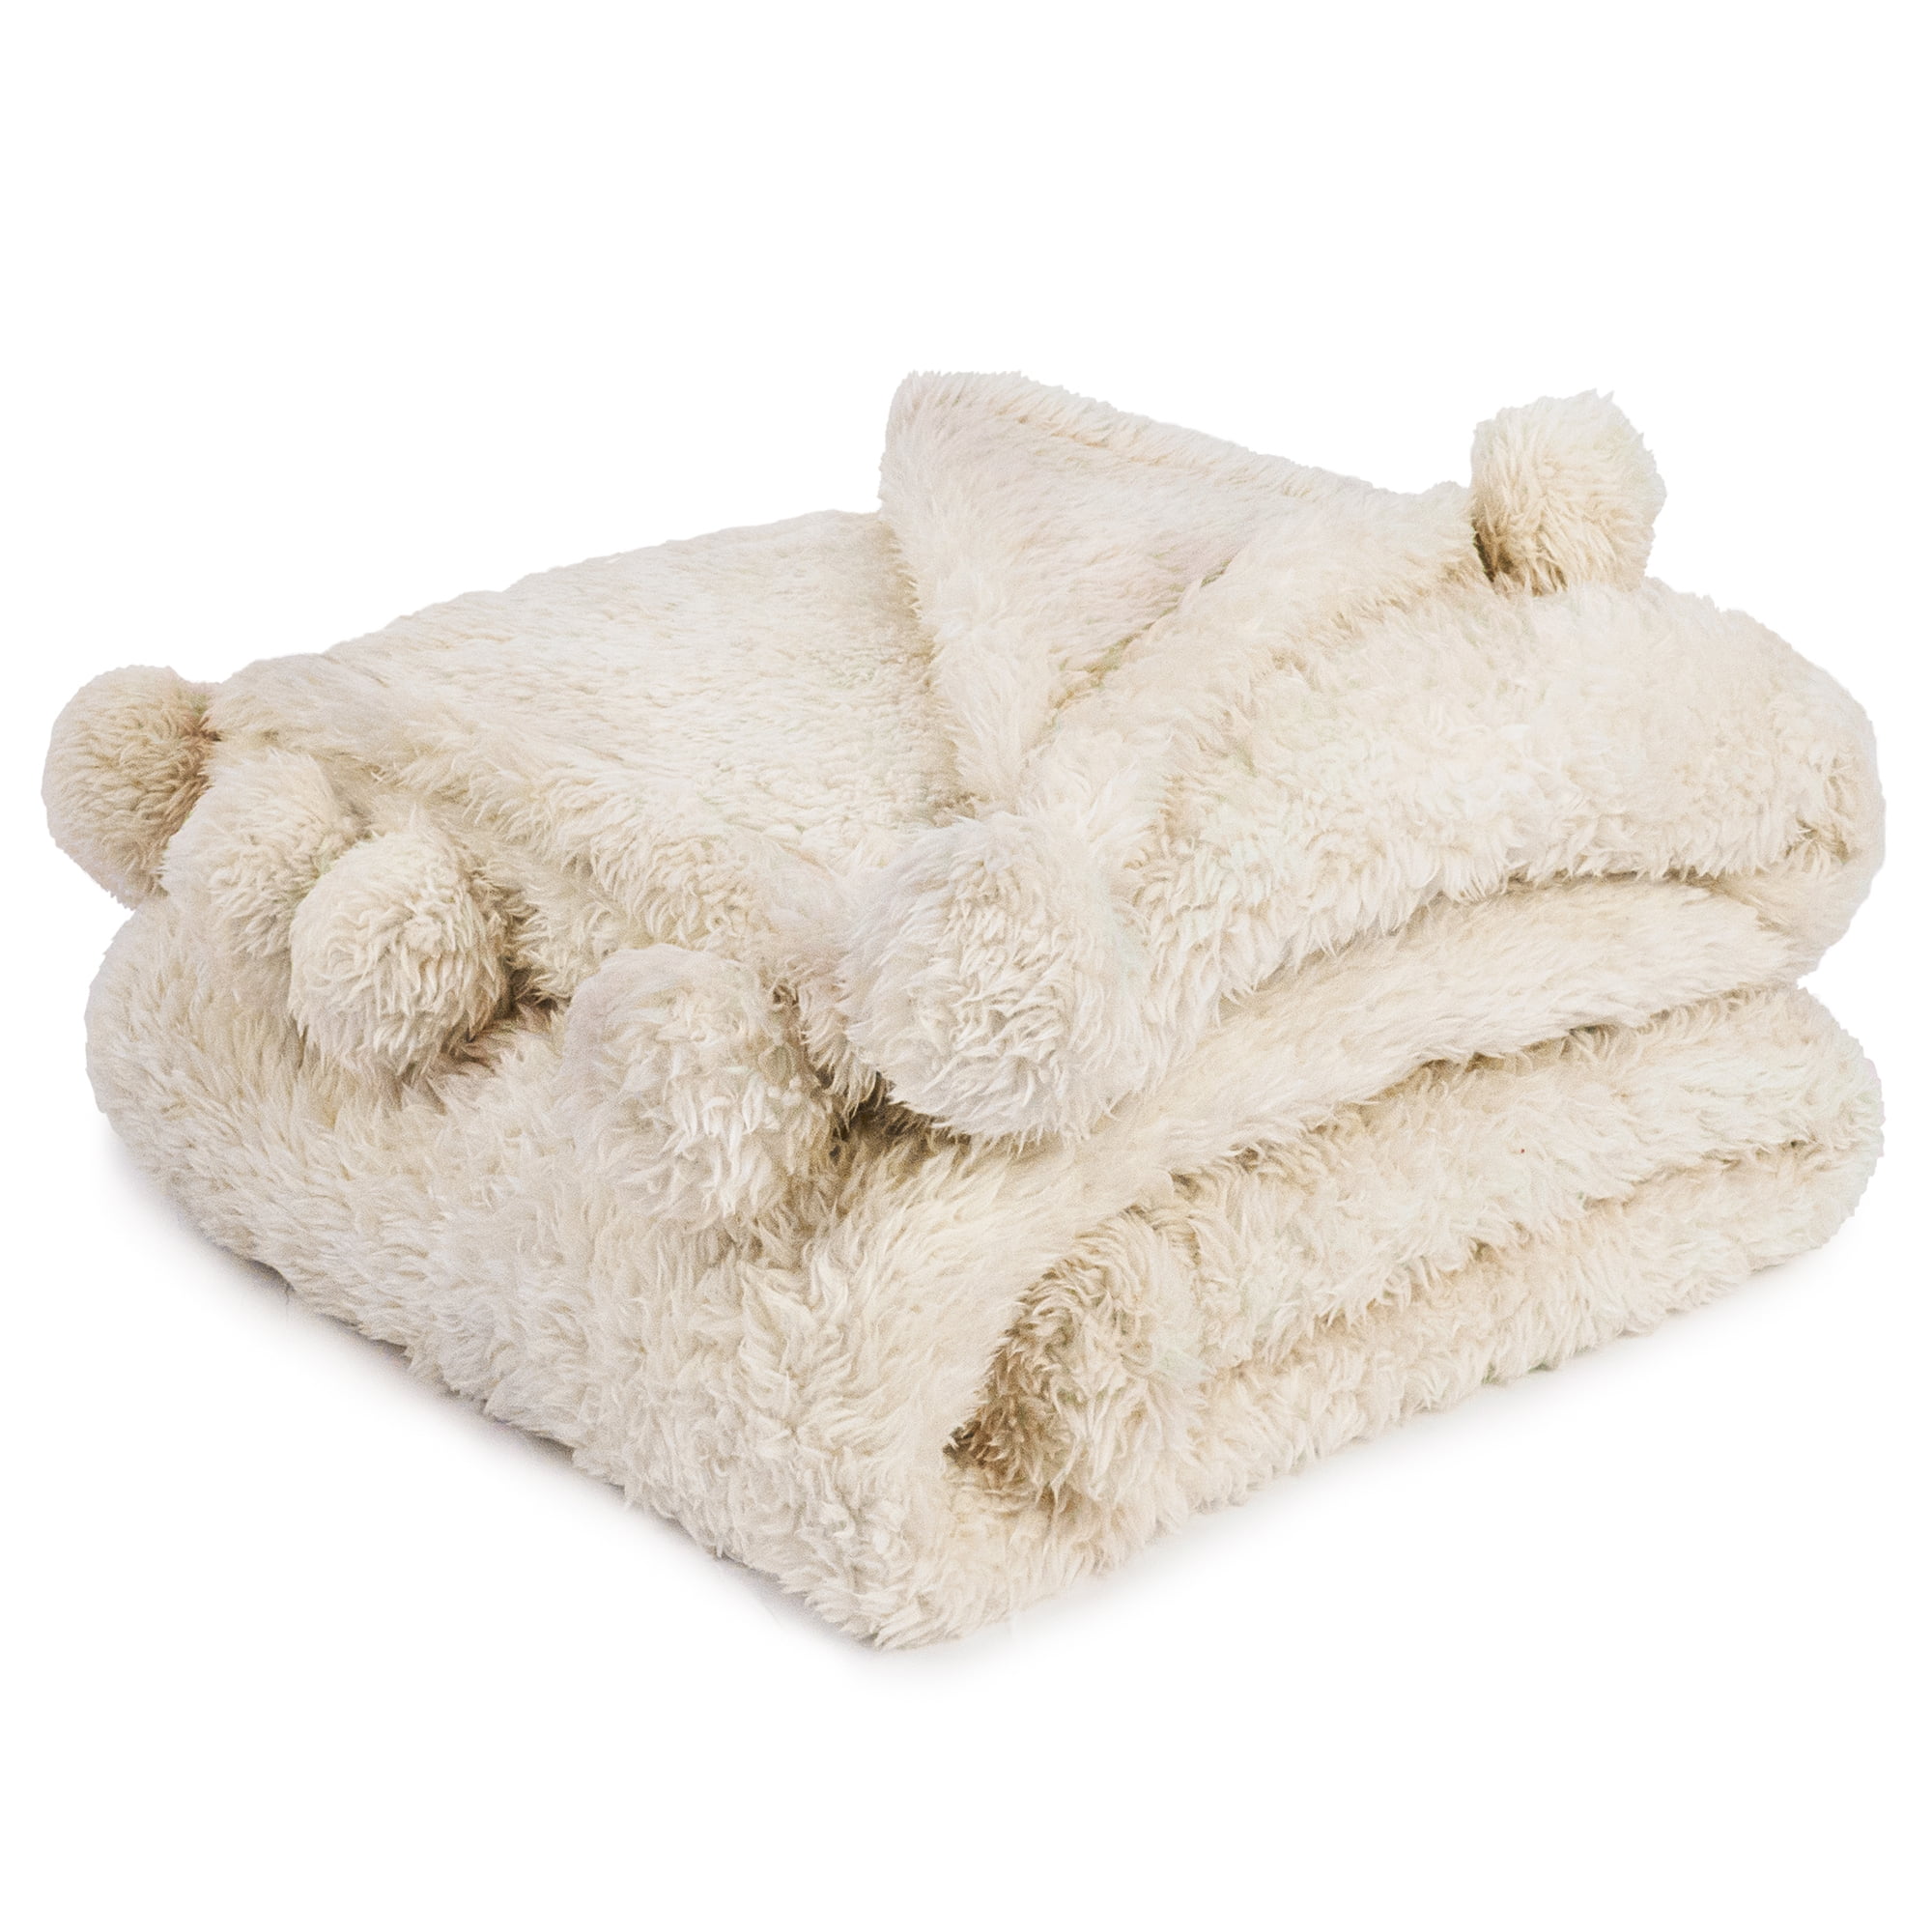 Micro-Pro Deluxe Double Layer Faux Fur Sherpa Fleece Blanket Large Soft Warm Home Sofa Bed Throw Grey Tones 130x155cm